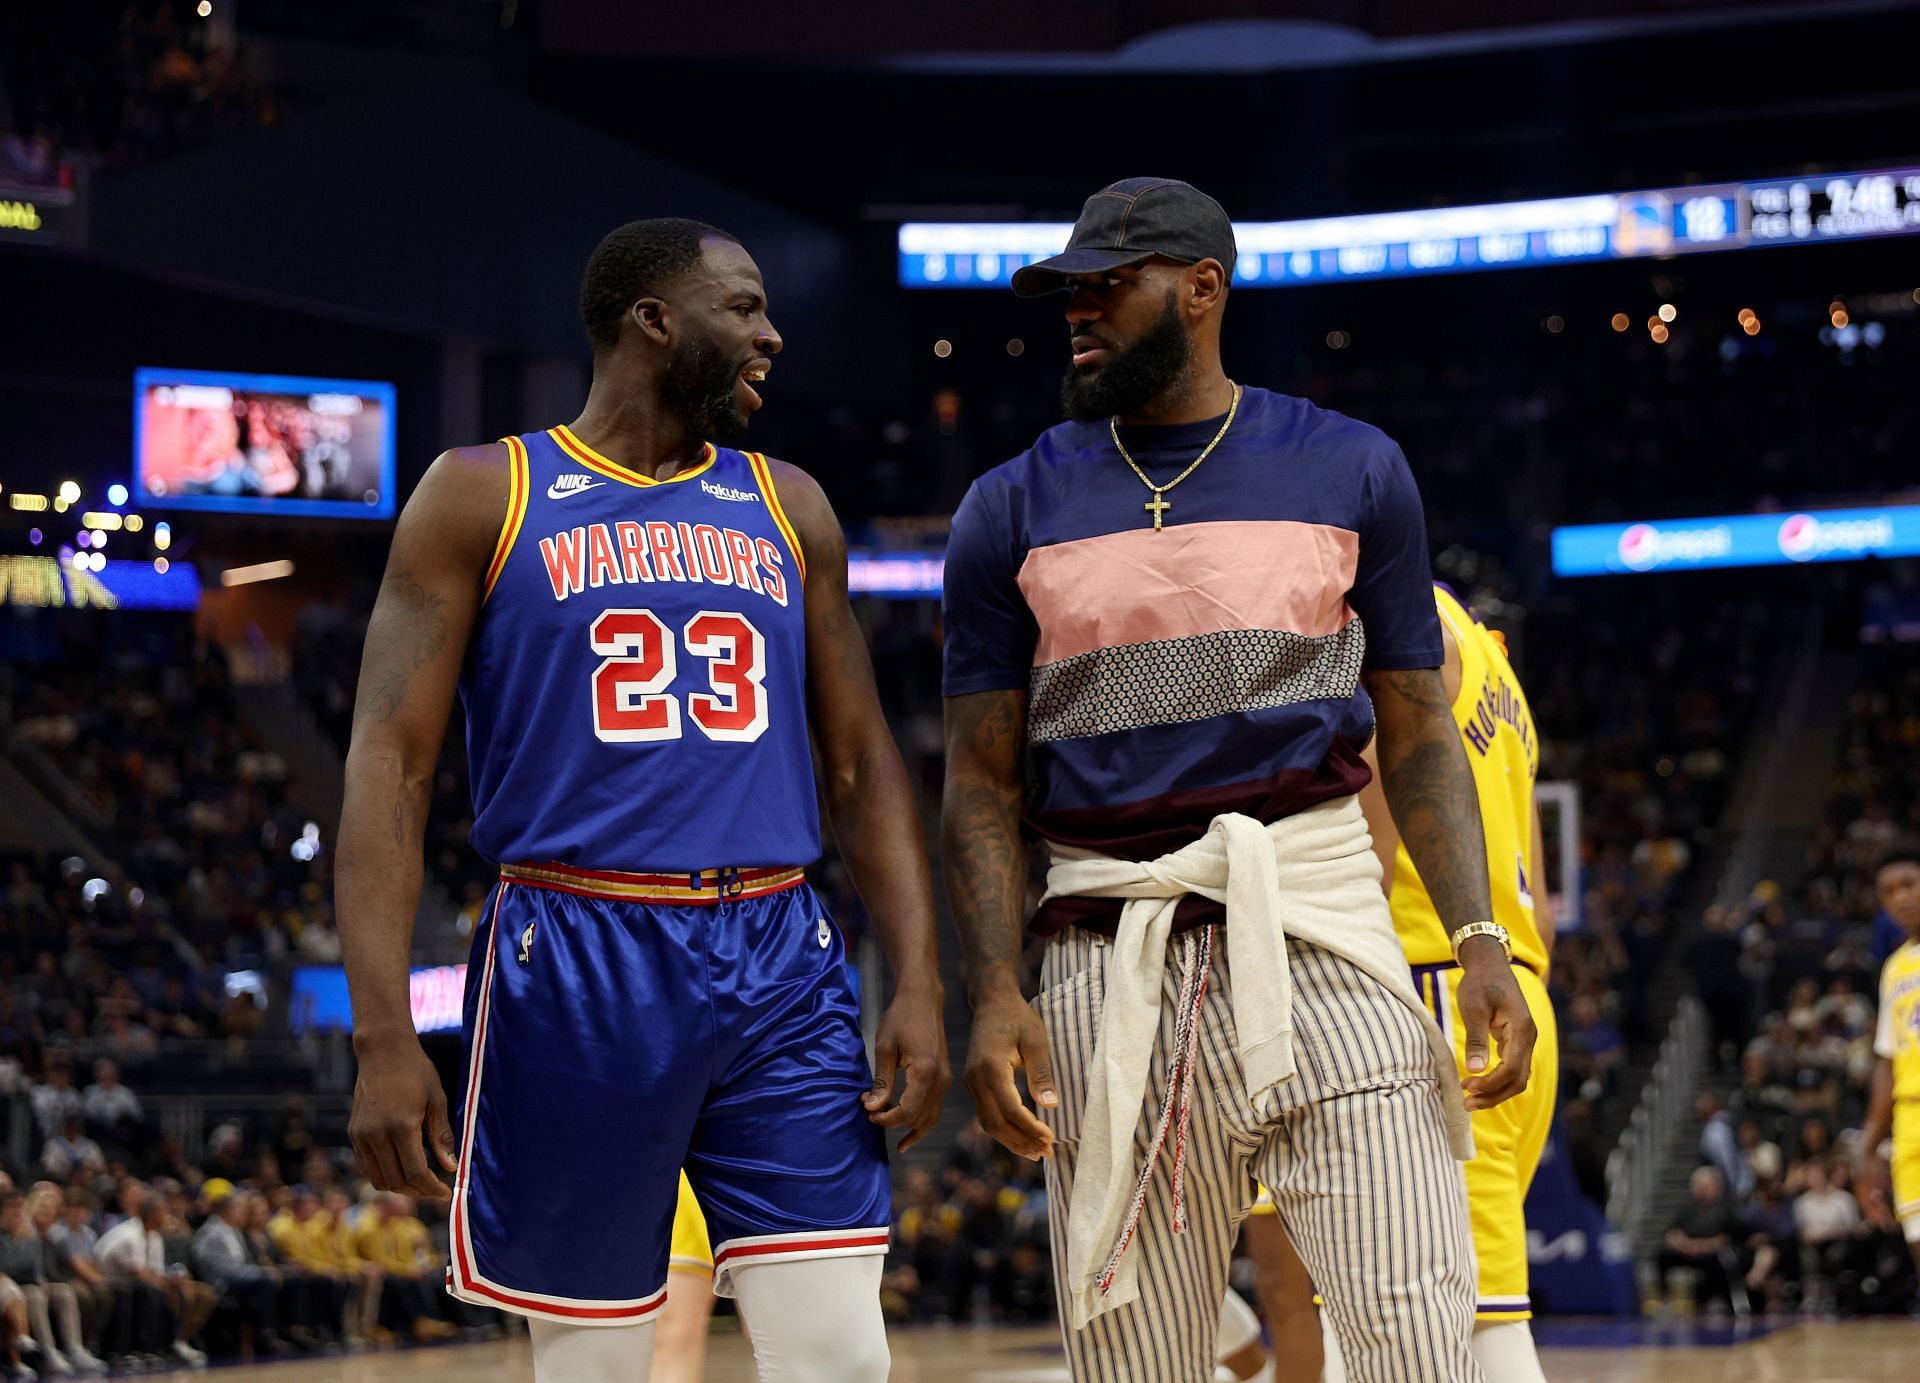 Need All Pieces and My Wife Too”: Billionaire LeBron James Tries to Get  Free Stuff from Louis Vuitton's Pharrell Williams in Hilarious Appreciation  Post with Savannah - The SportsRush